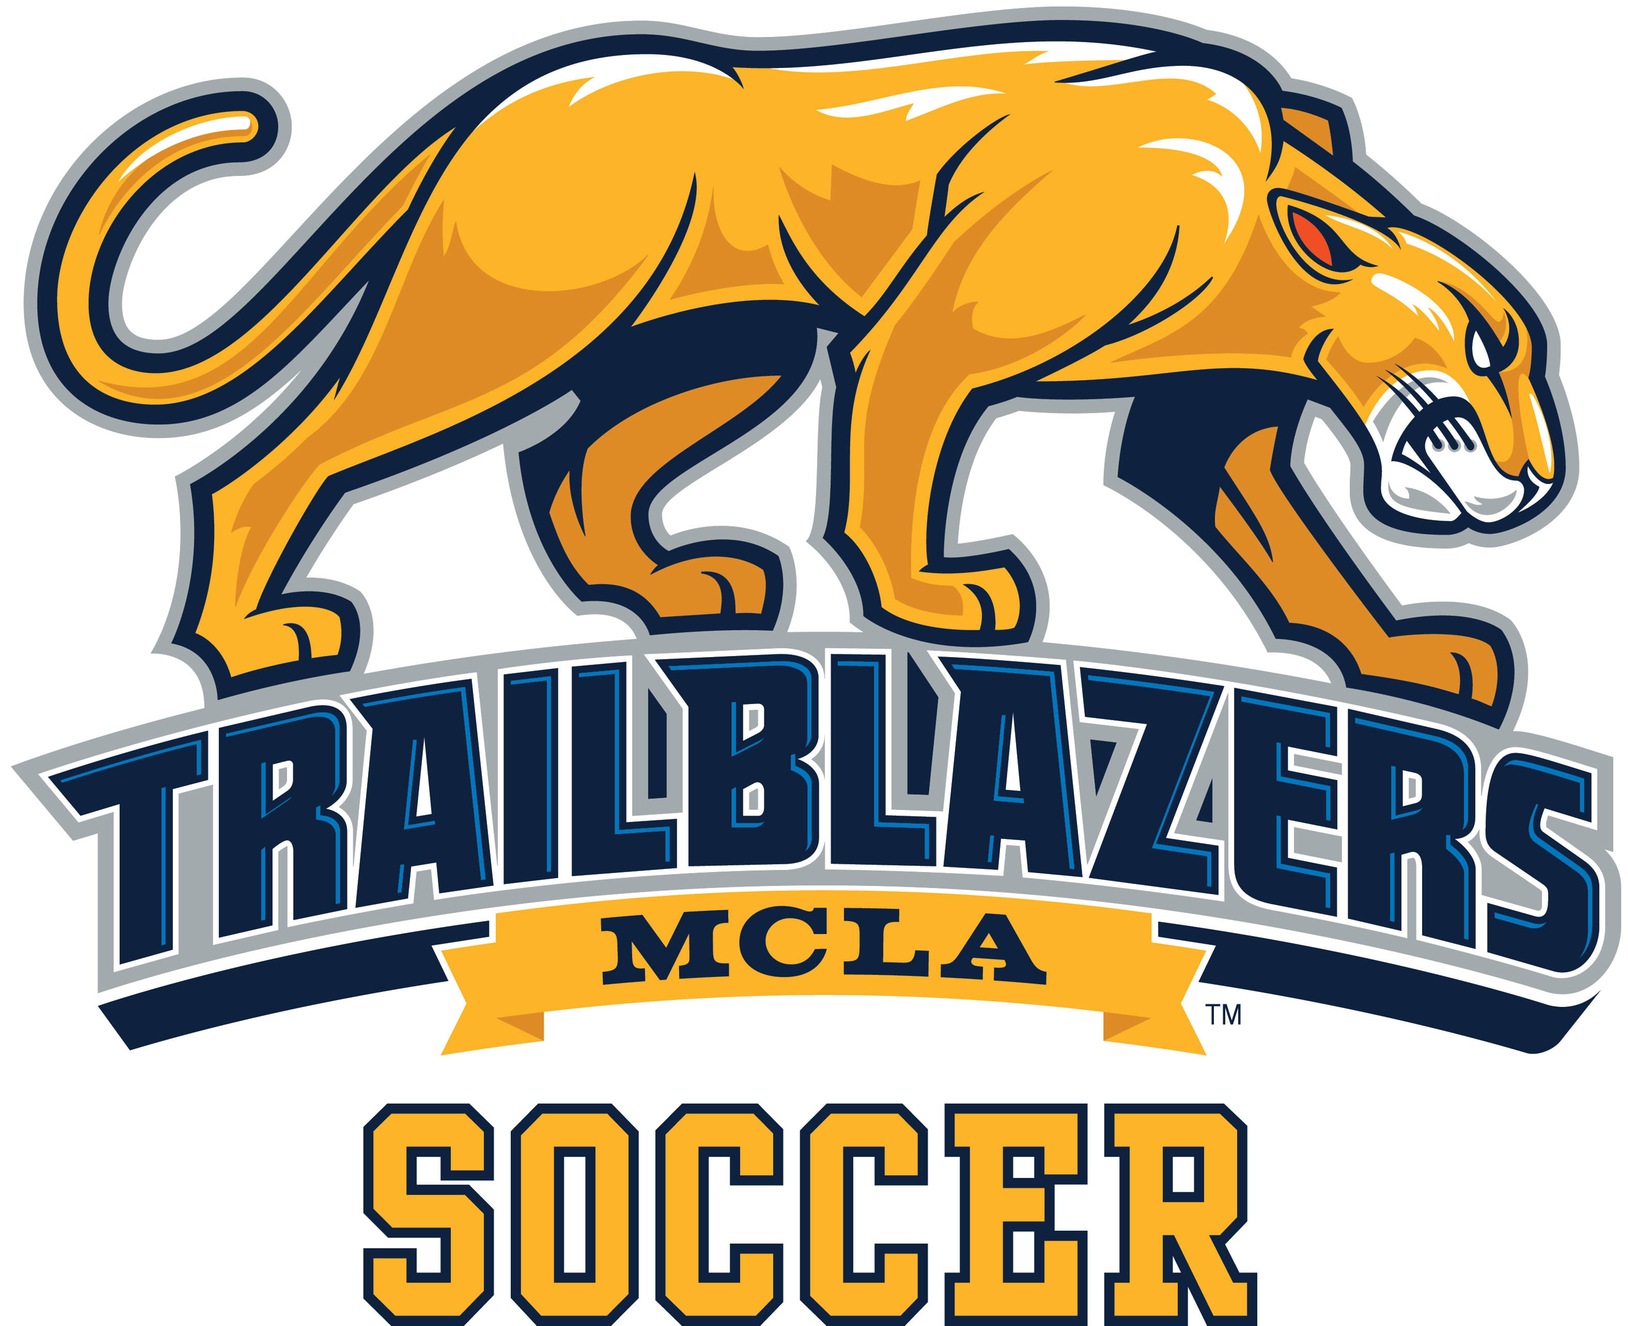 Men's Soccer clinic cancelled due to COVID-19